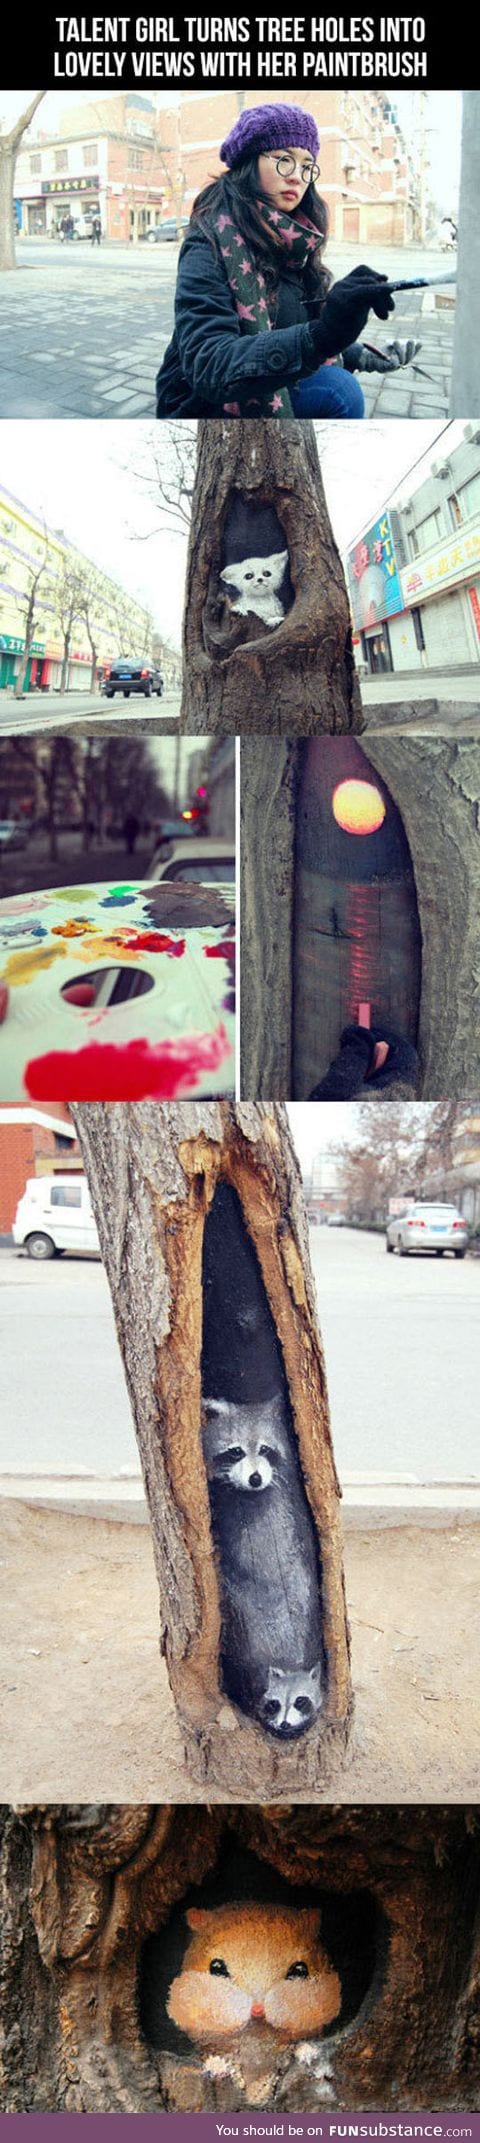 Clever art inside tree holes